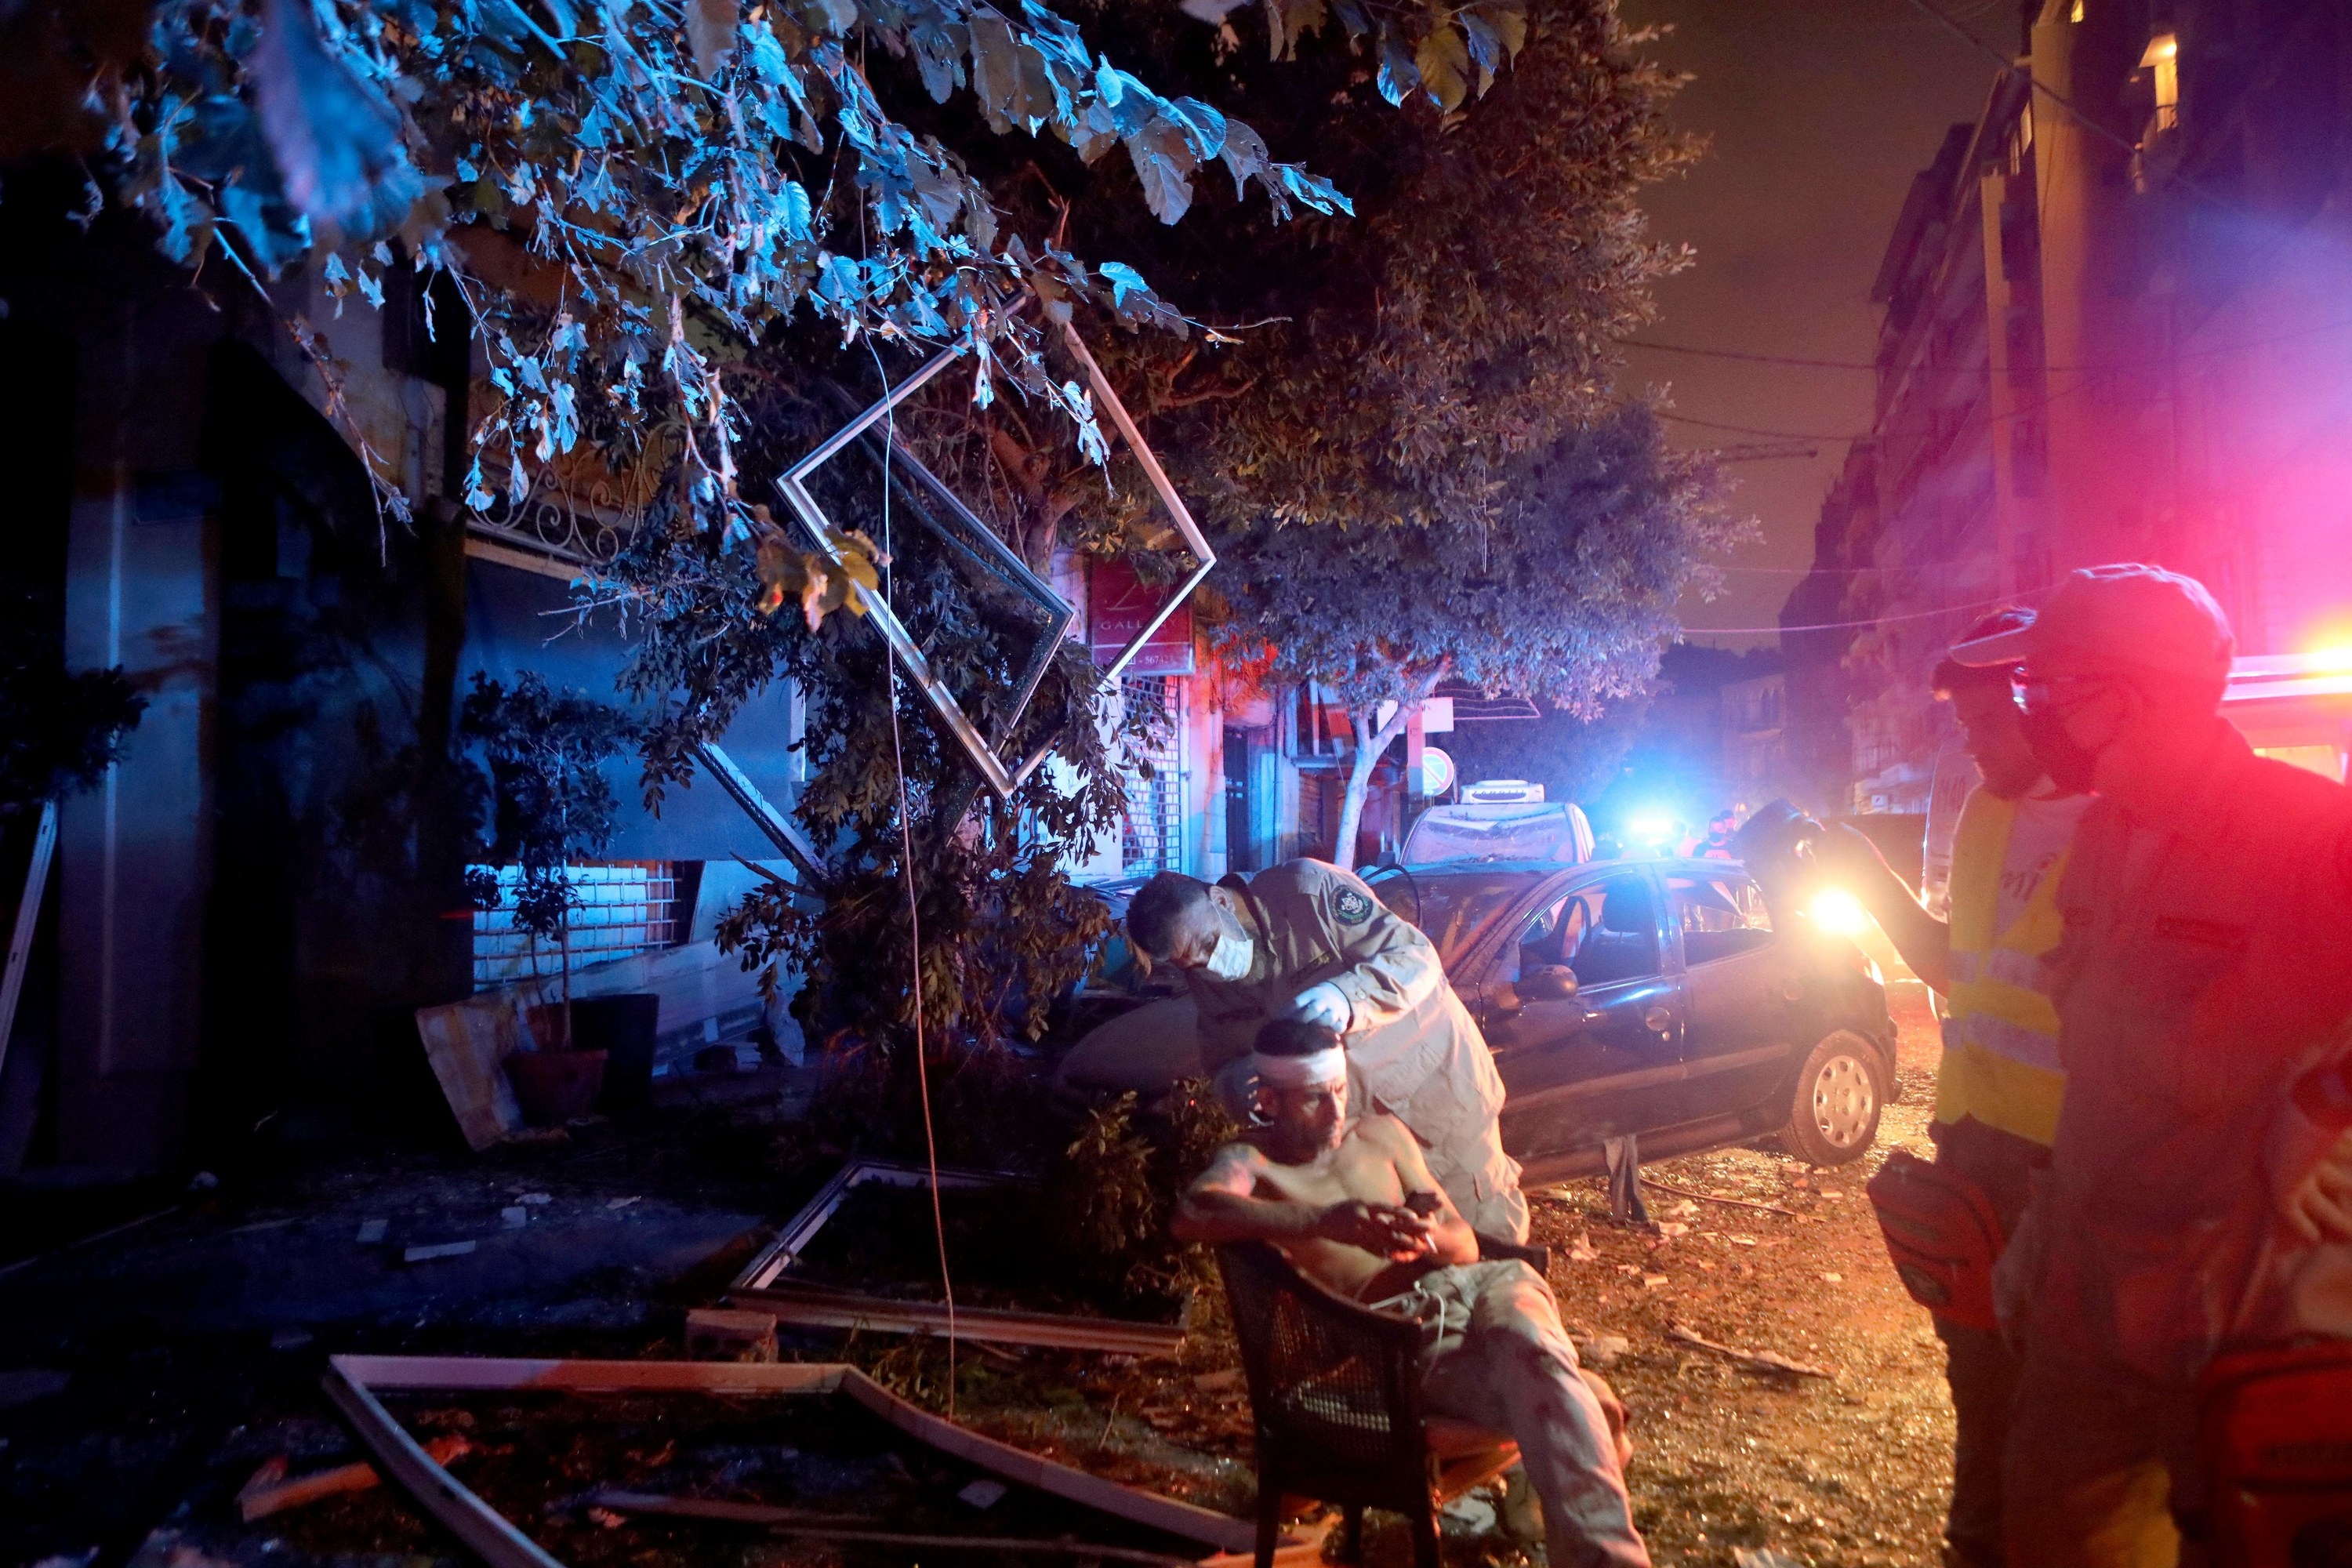 An injured man sits outside under red and white lights at night while a rescue worker examines his bandaged head